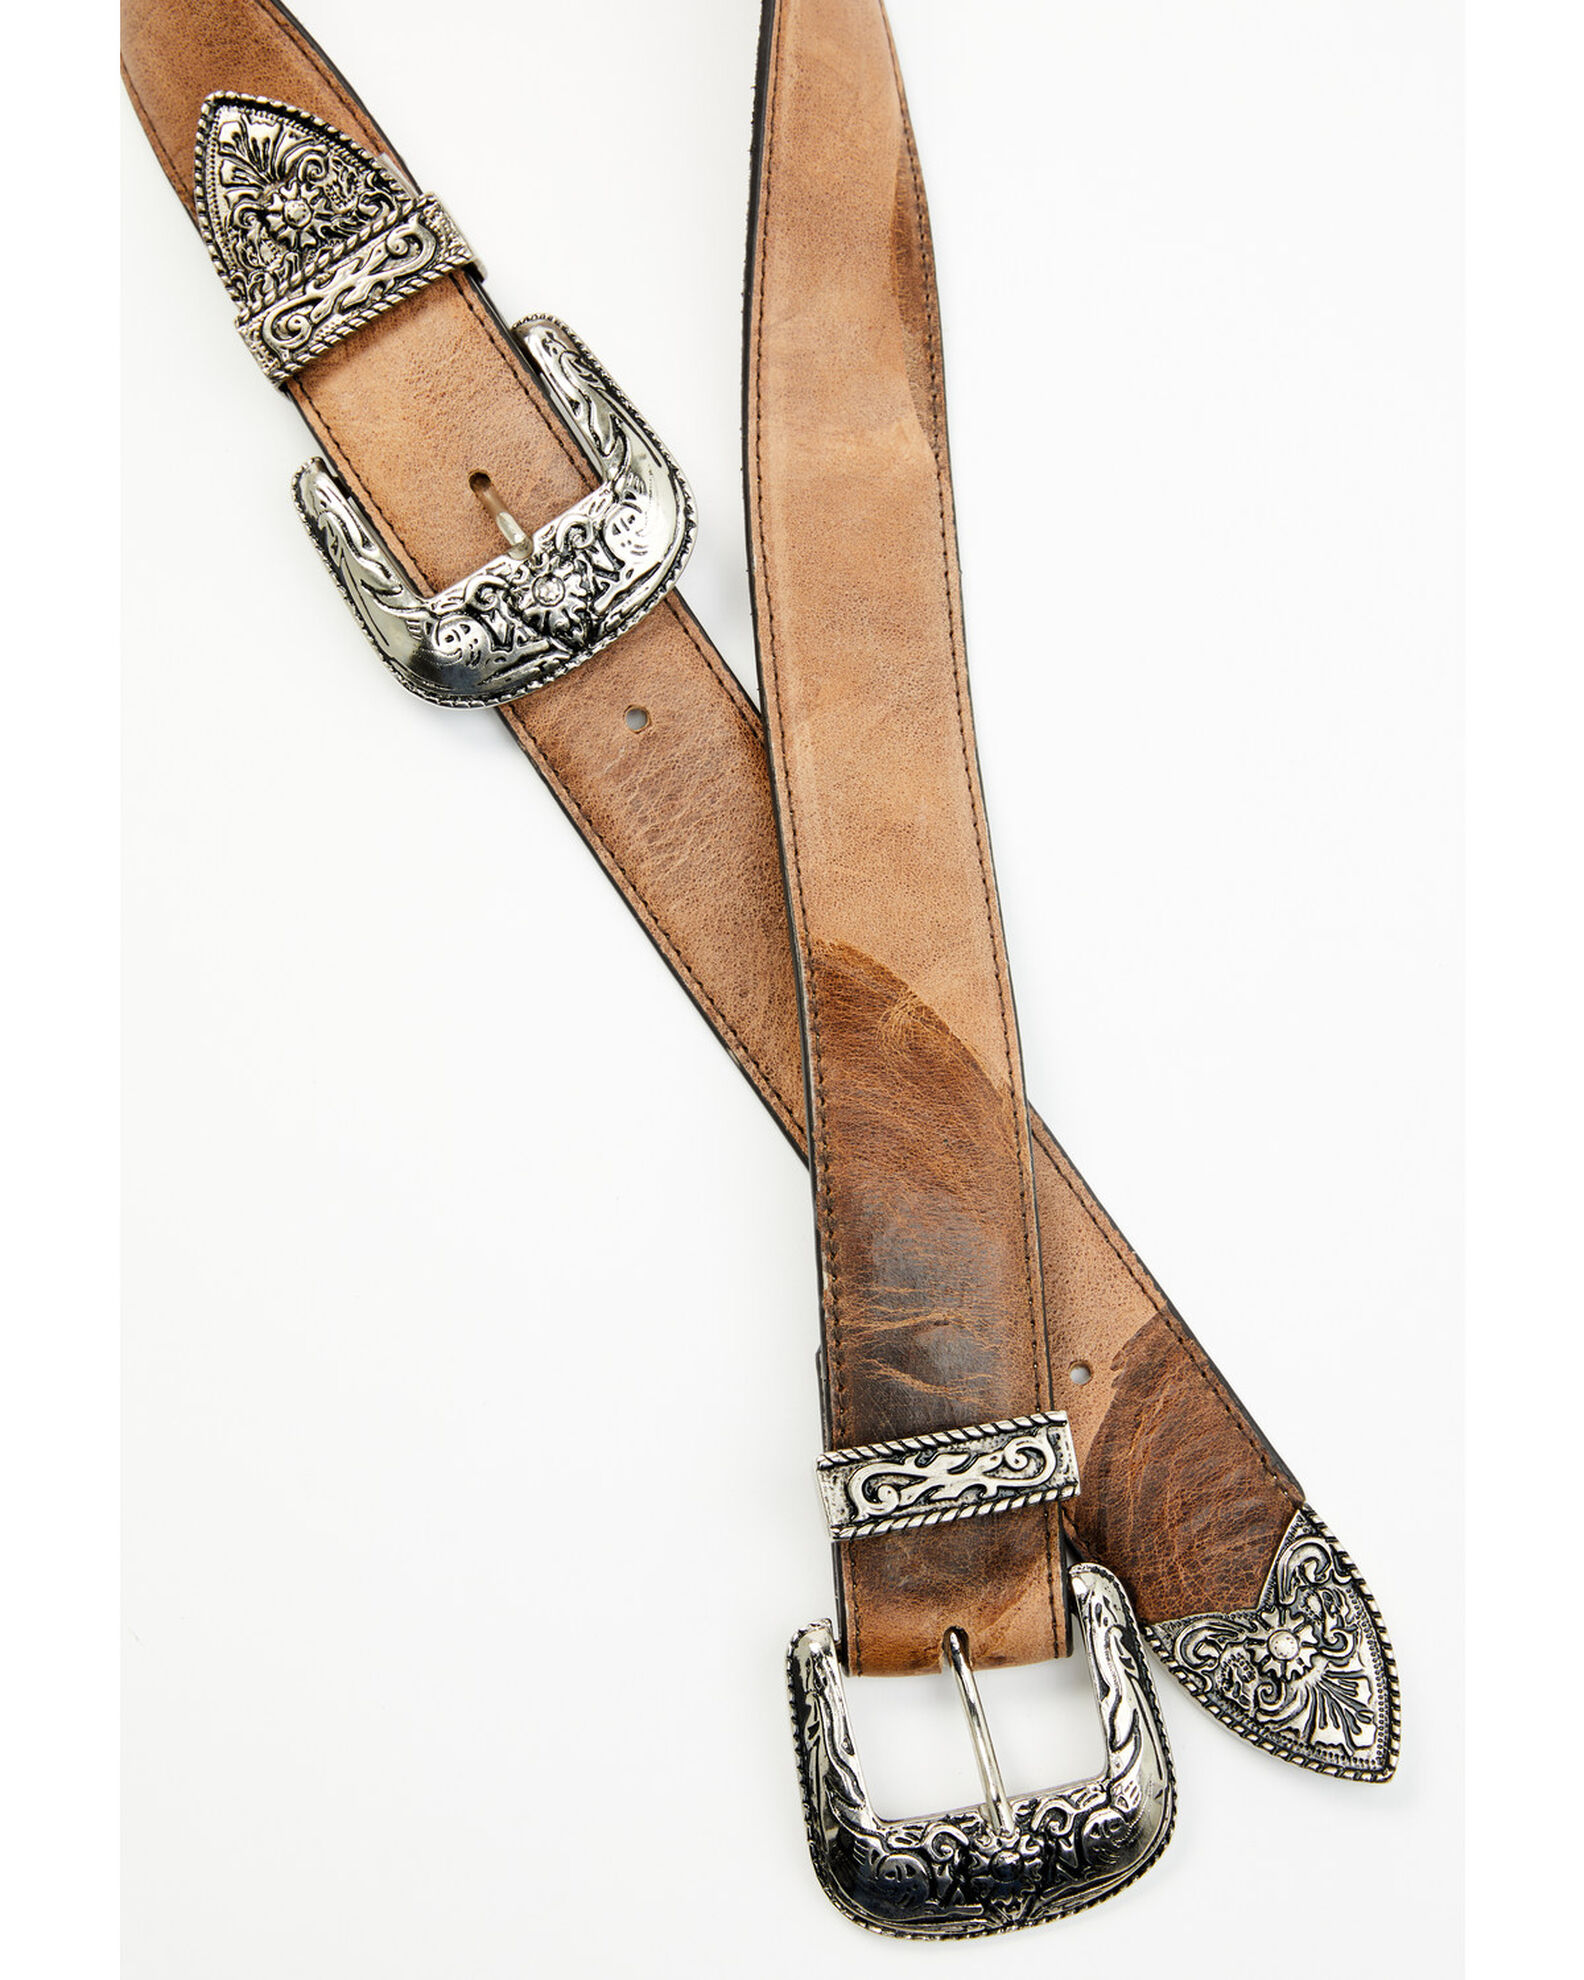 Product Name: Idyllwind Women's Outlaw Western Double Buckle Belt